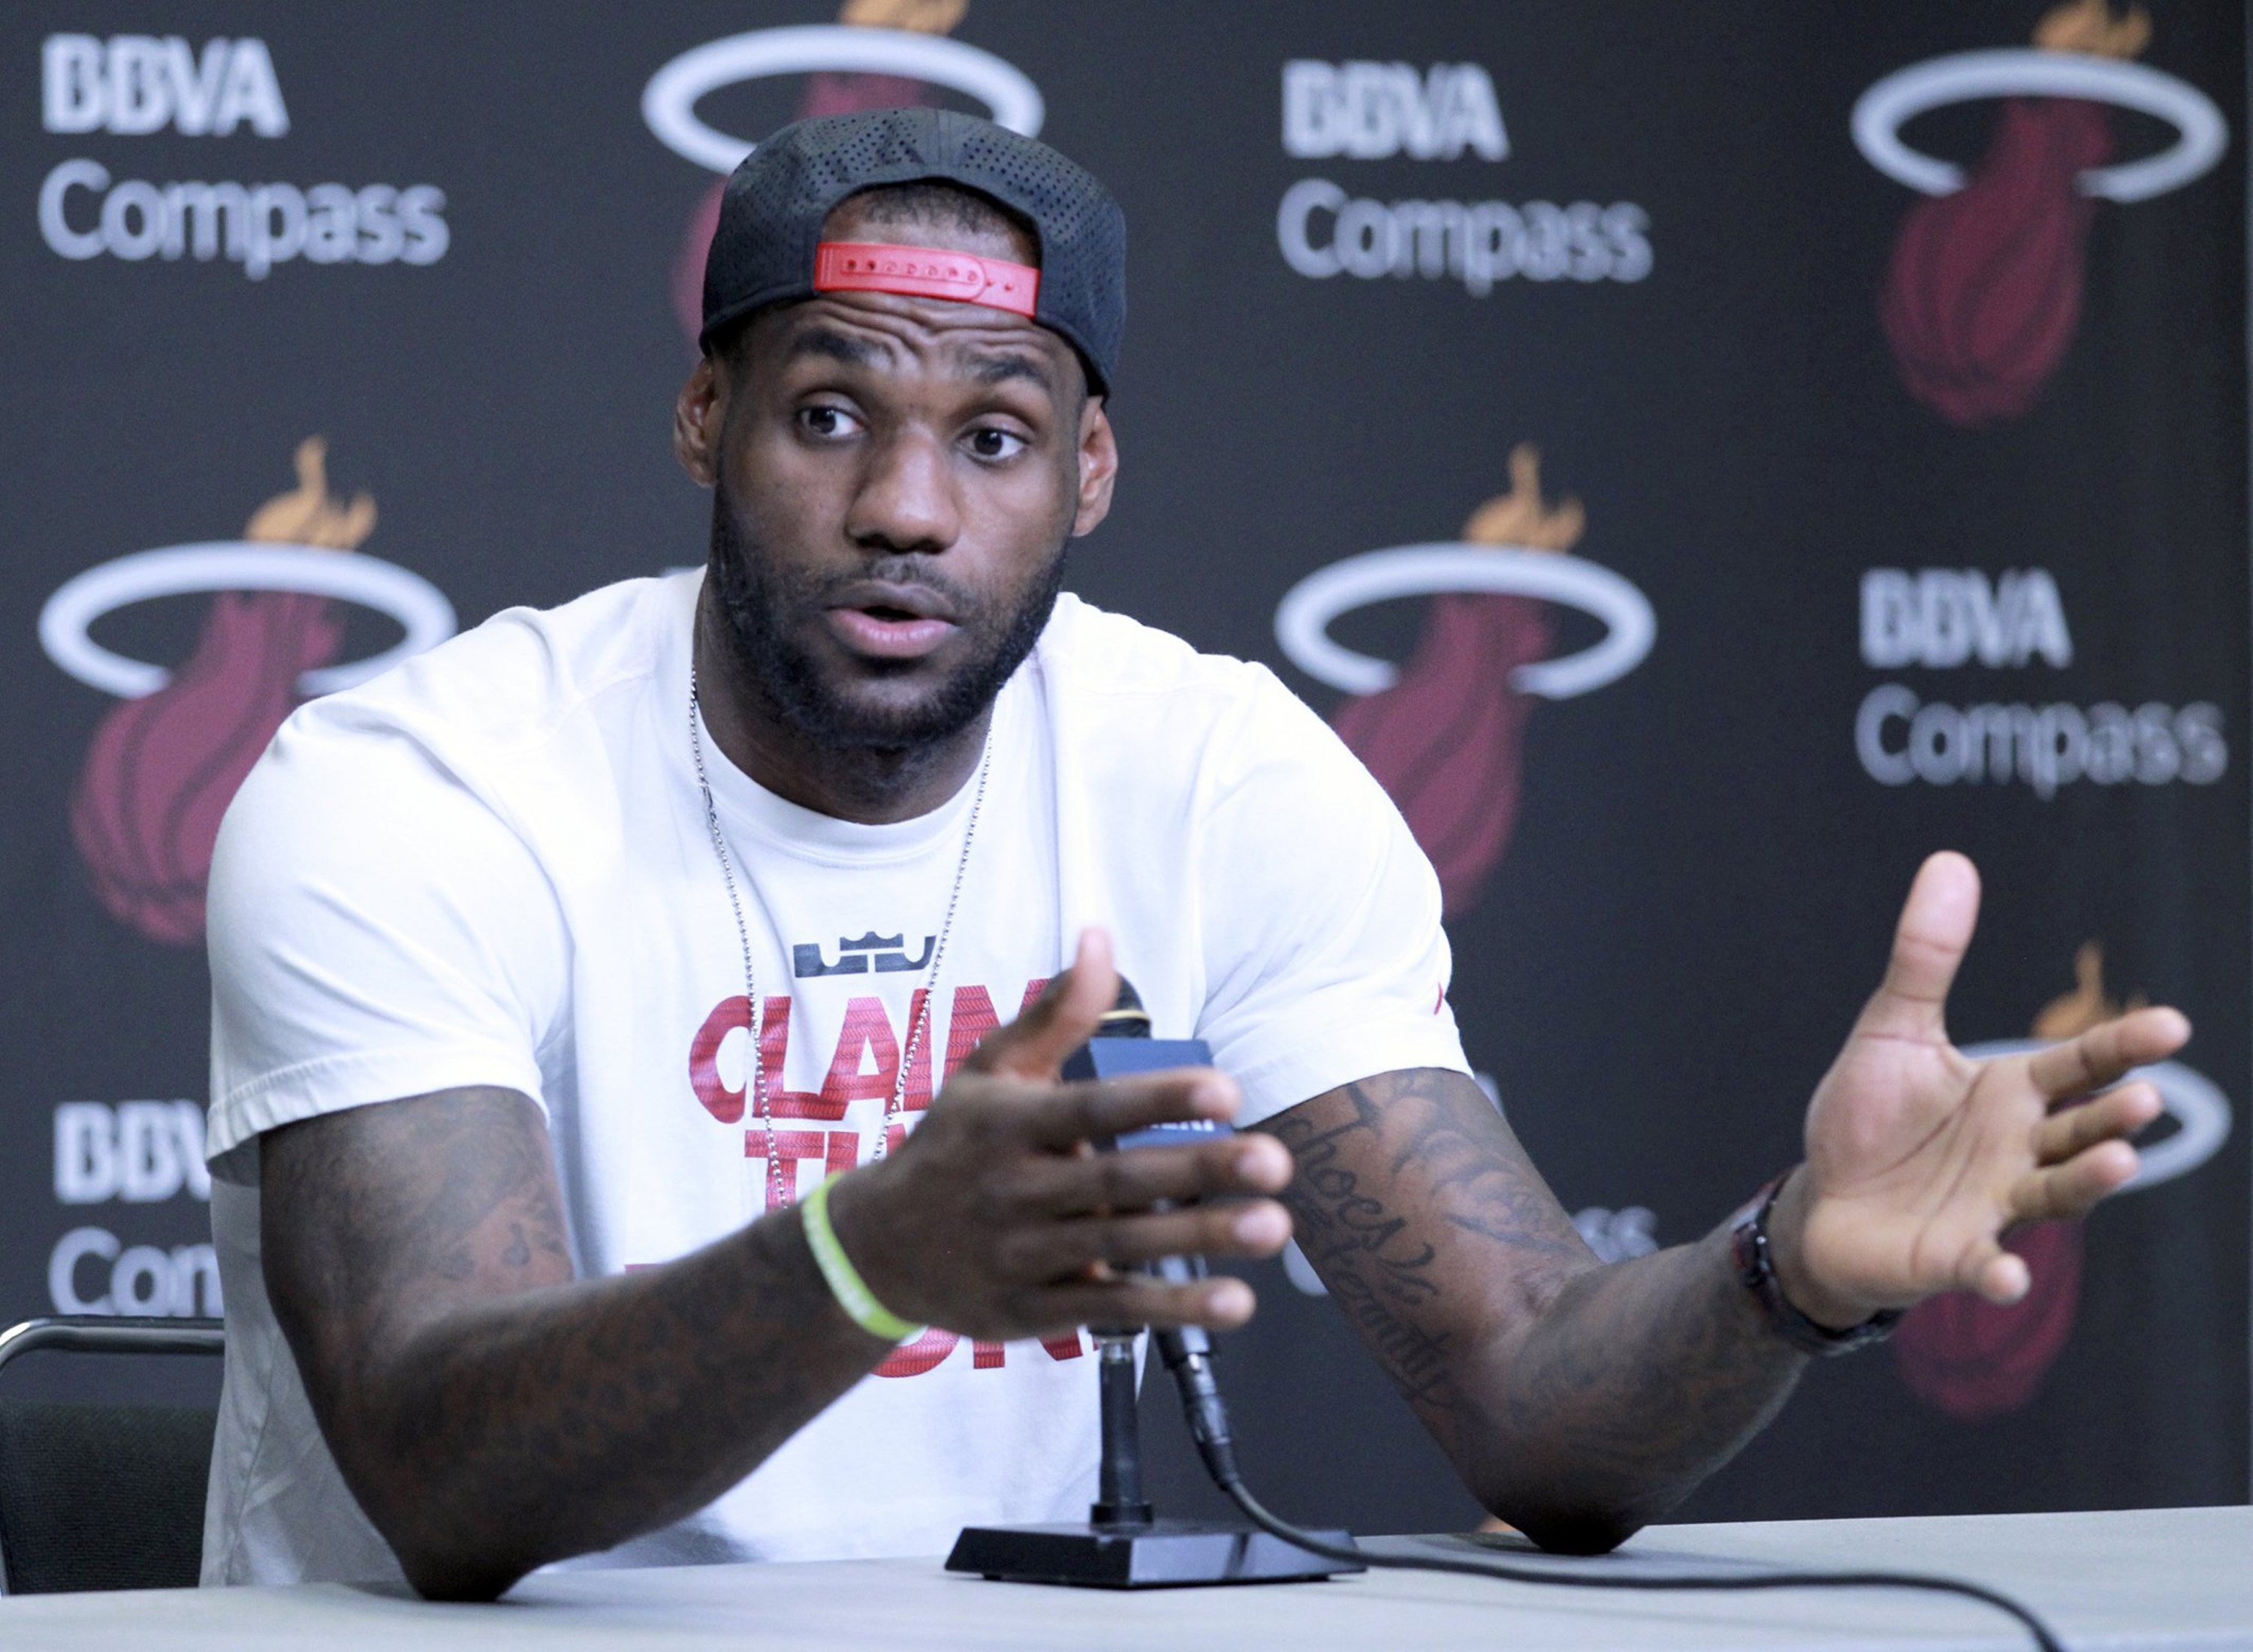 Miami Heat's LeBron James talks with the media during a press conference at the AmericanAirlines Arena on June 17, 2014, in Miami. (Miami Herald&mdash;MCT via Getty Images)